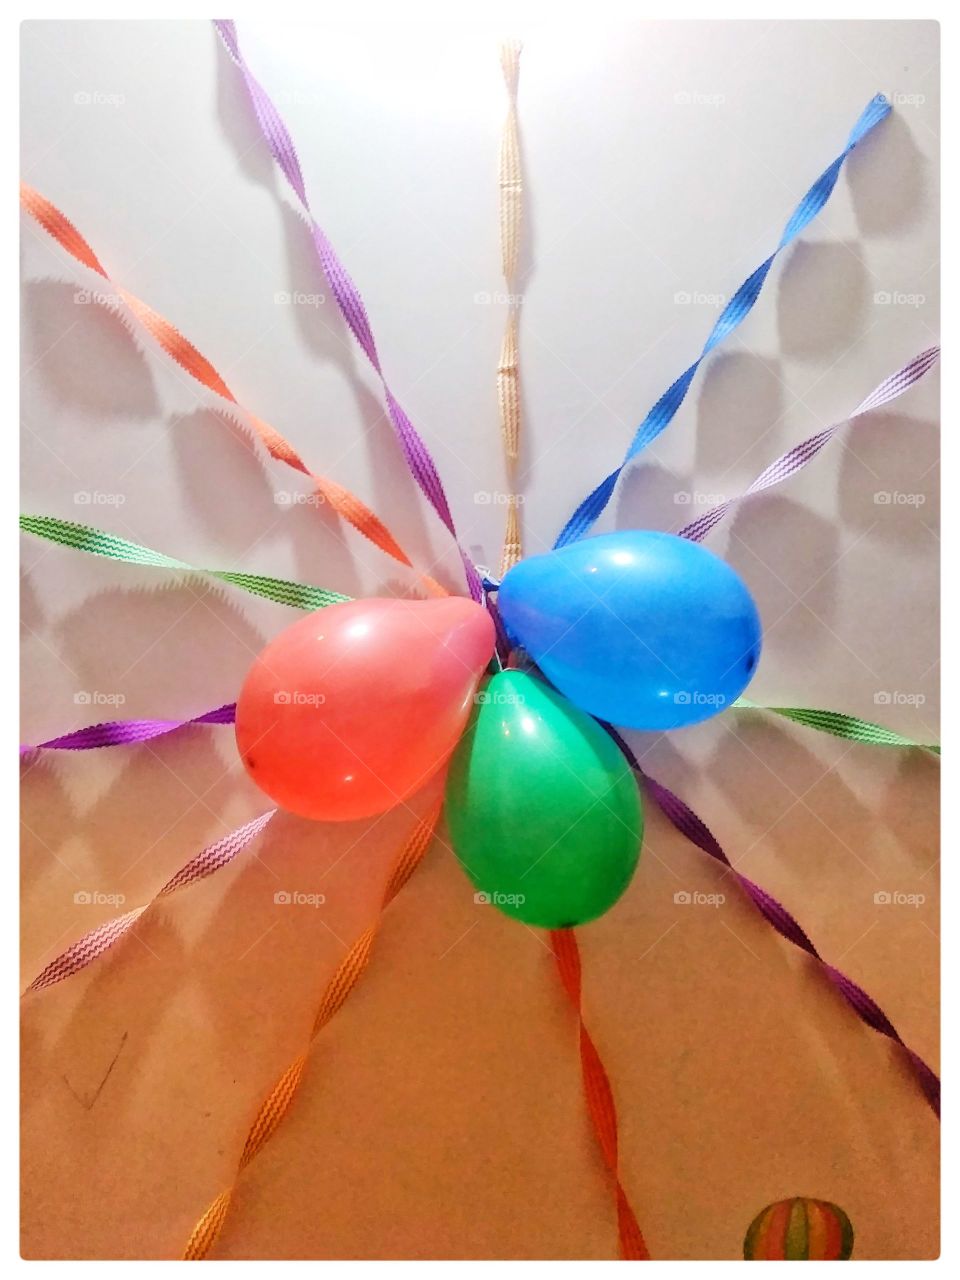 it is a very sweet illuminated baloon multi coloured ribbon sewing item Celebration white background birthday holiday event close up in Patna India